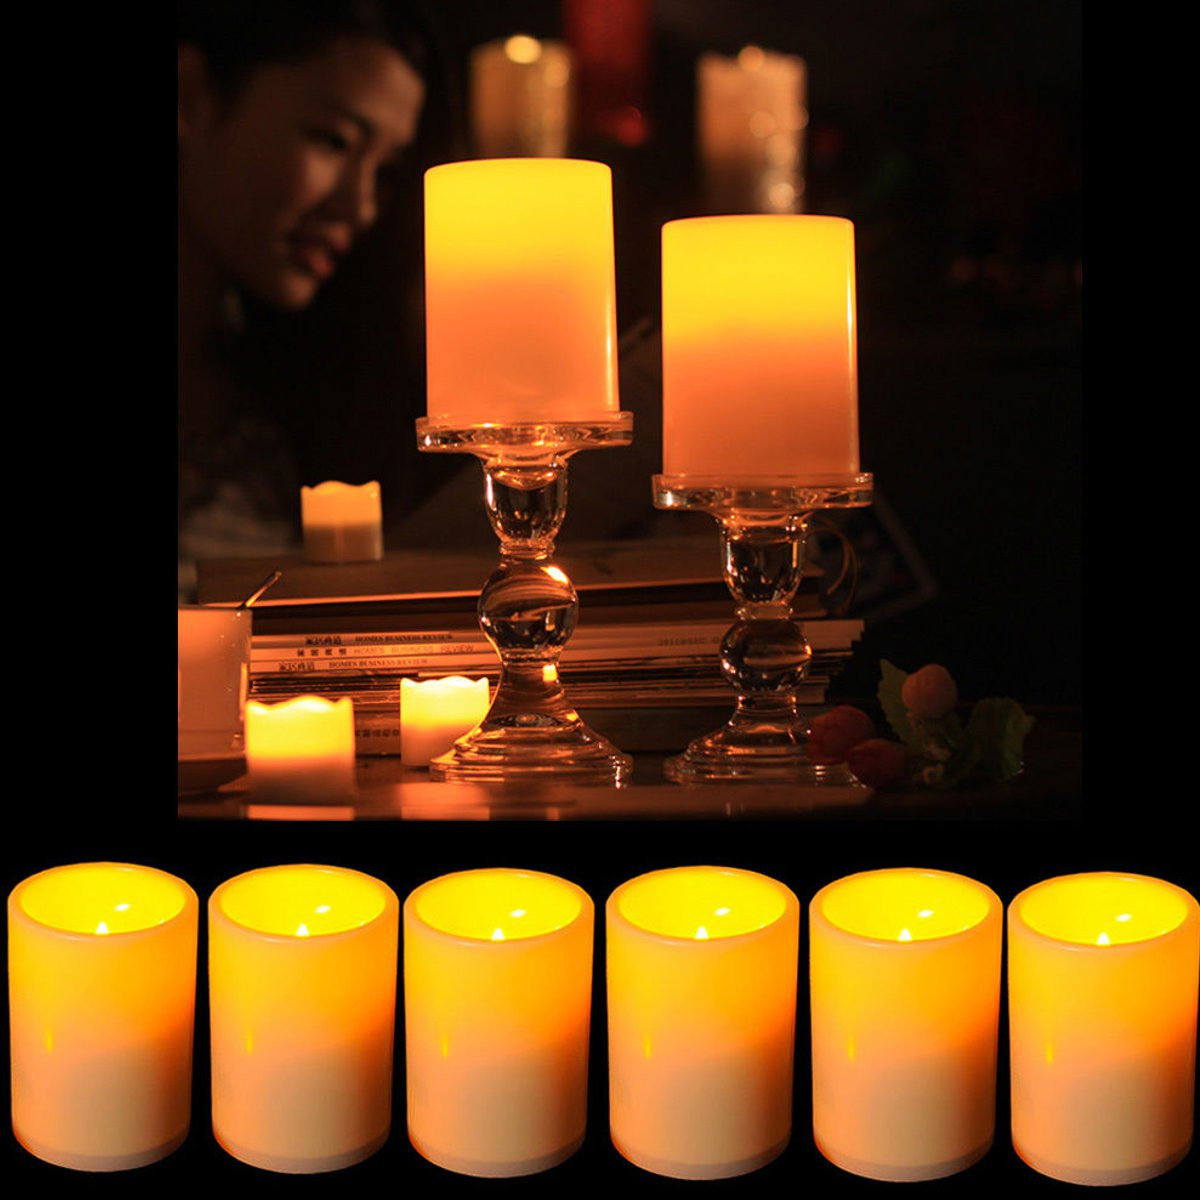 

Battery Powered Flameless LED Table Lamp Candle Flickering Tea Light Christmas Wedding Home Decor